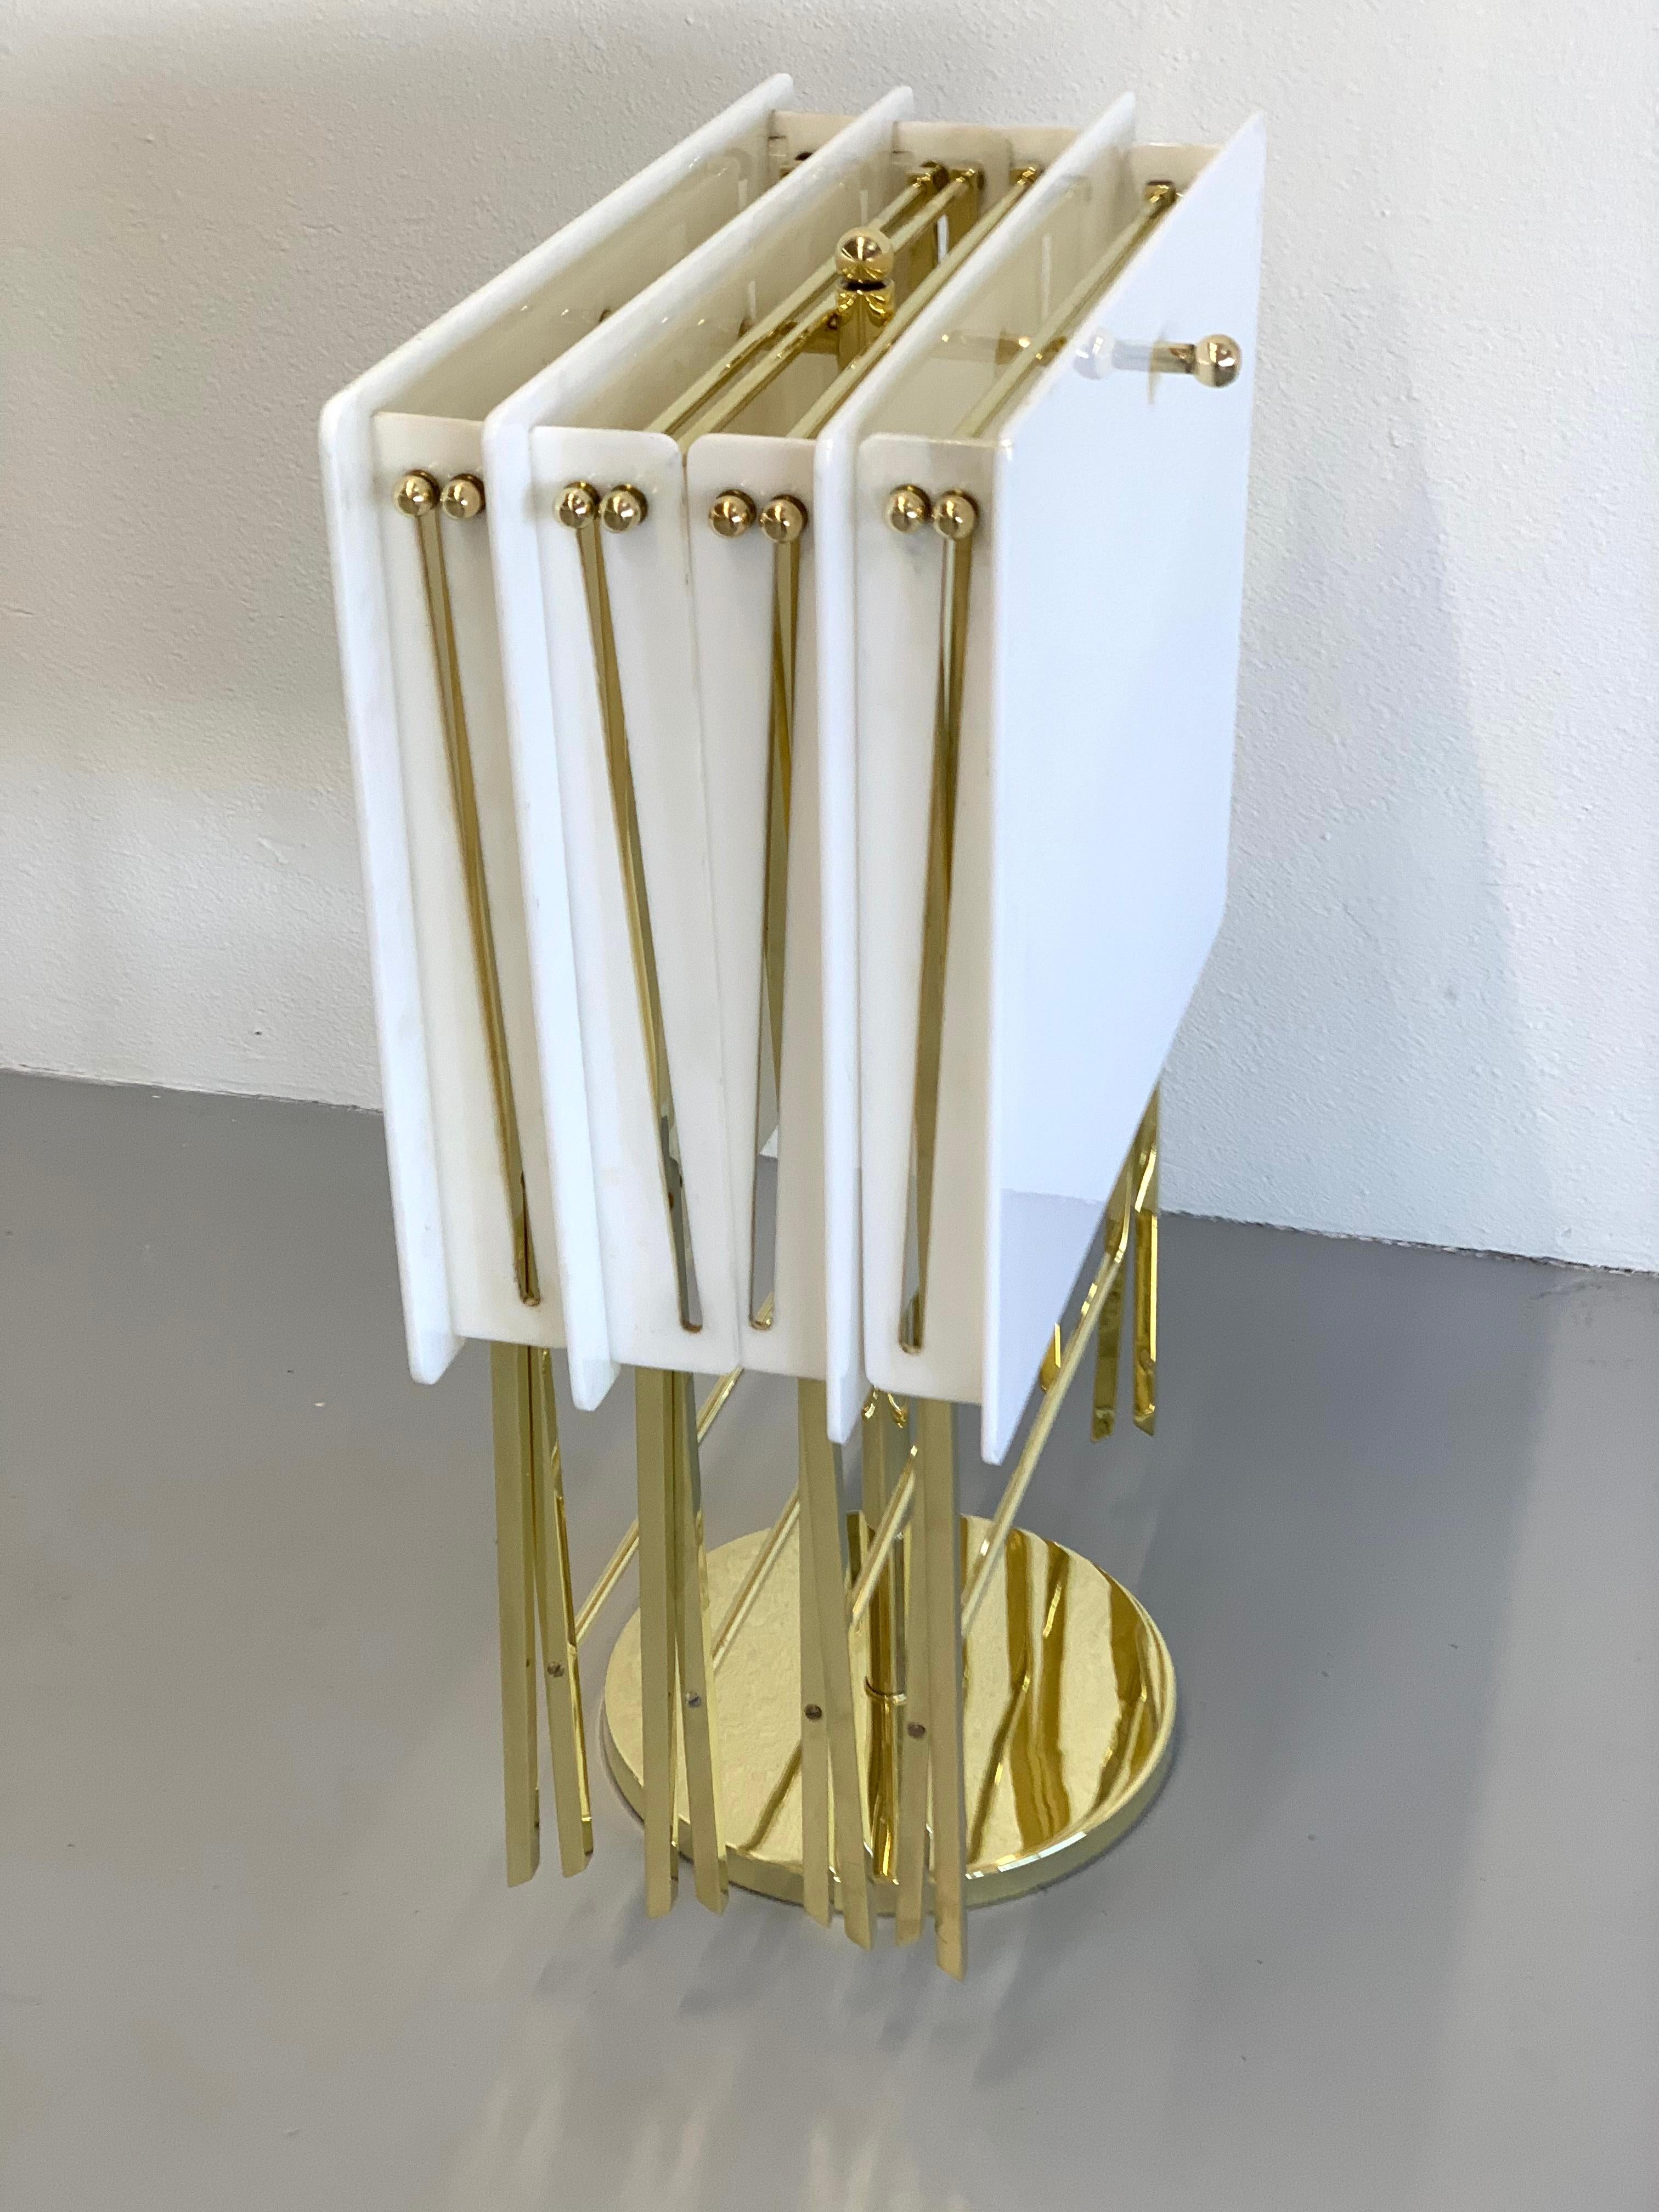 A nice early set of white acrylic and brass folding tables with a matching stand to hold them from when not in use. This group to the 1960s as Charles Hollis Jones recently pointed out when he authenticated them as his work on a recent visit to the